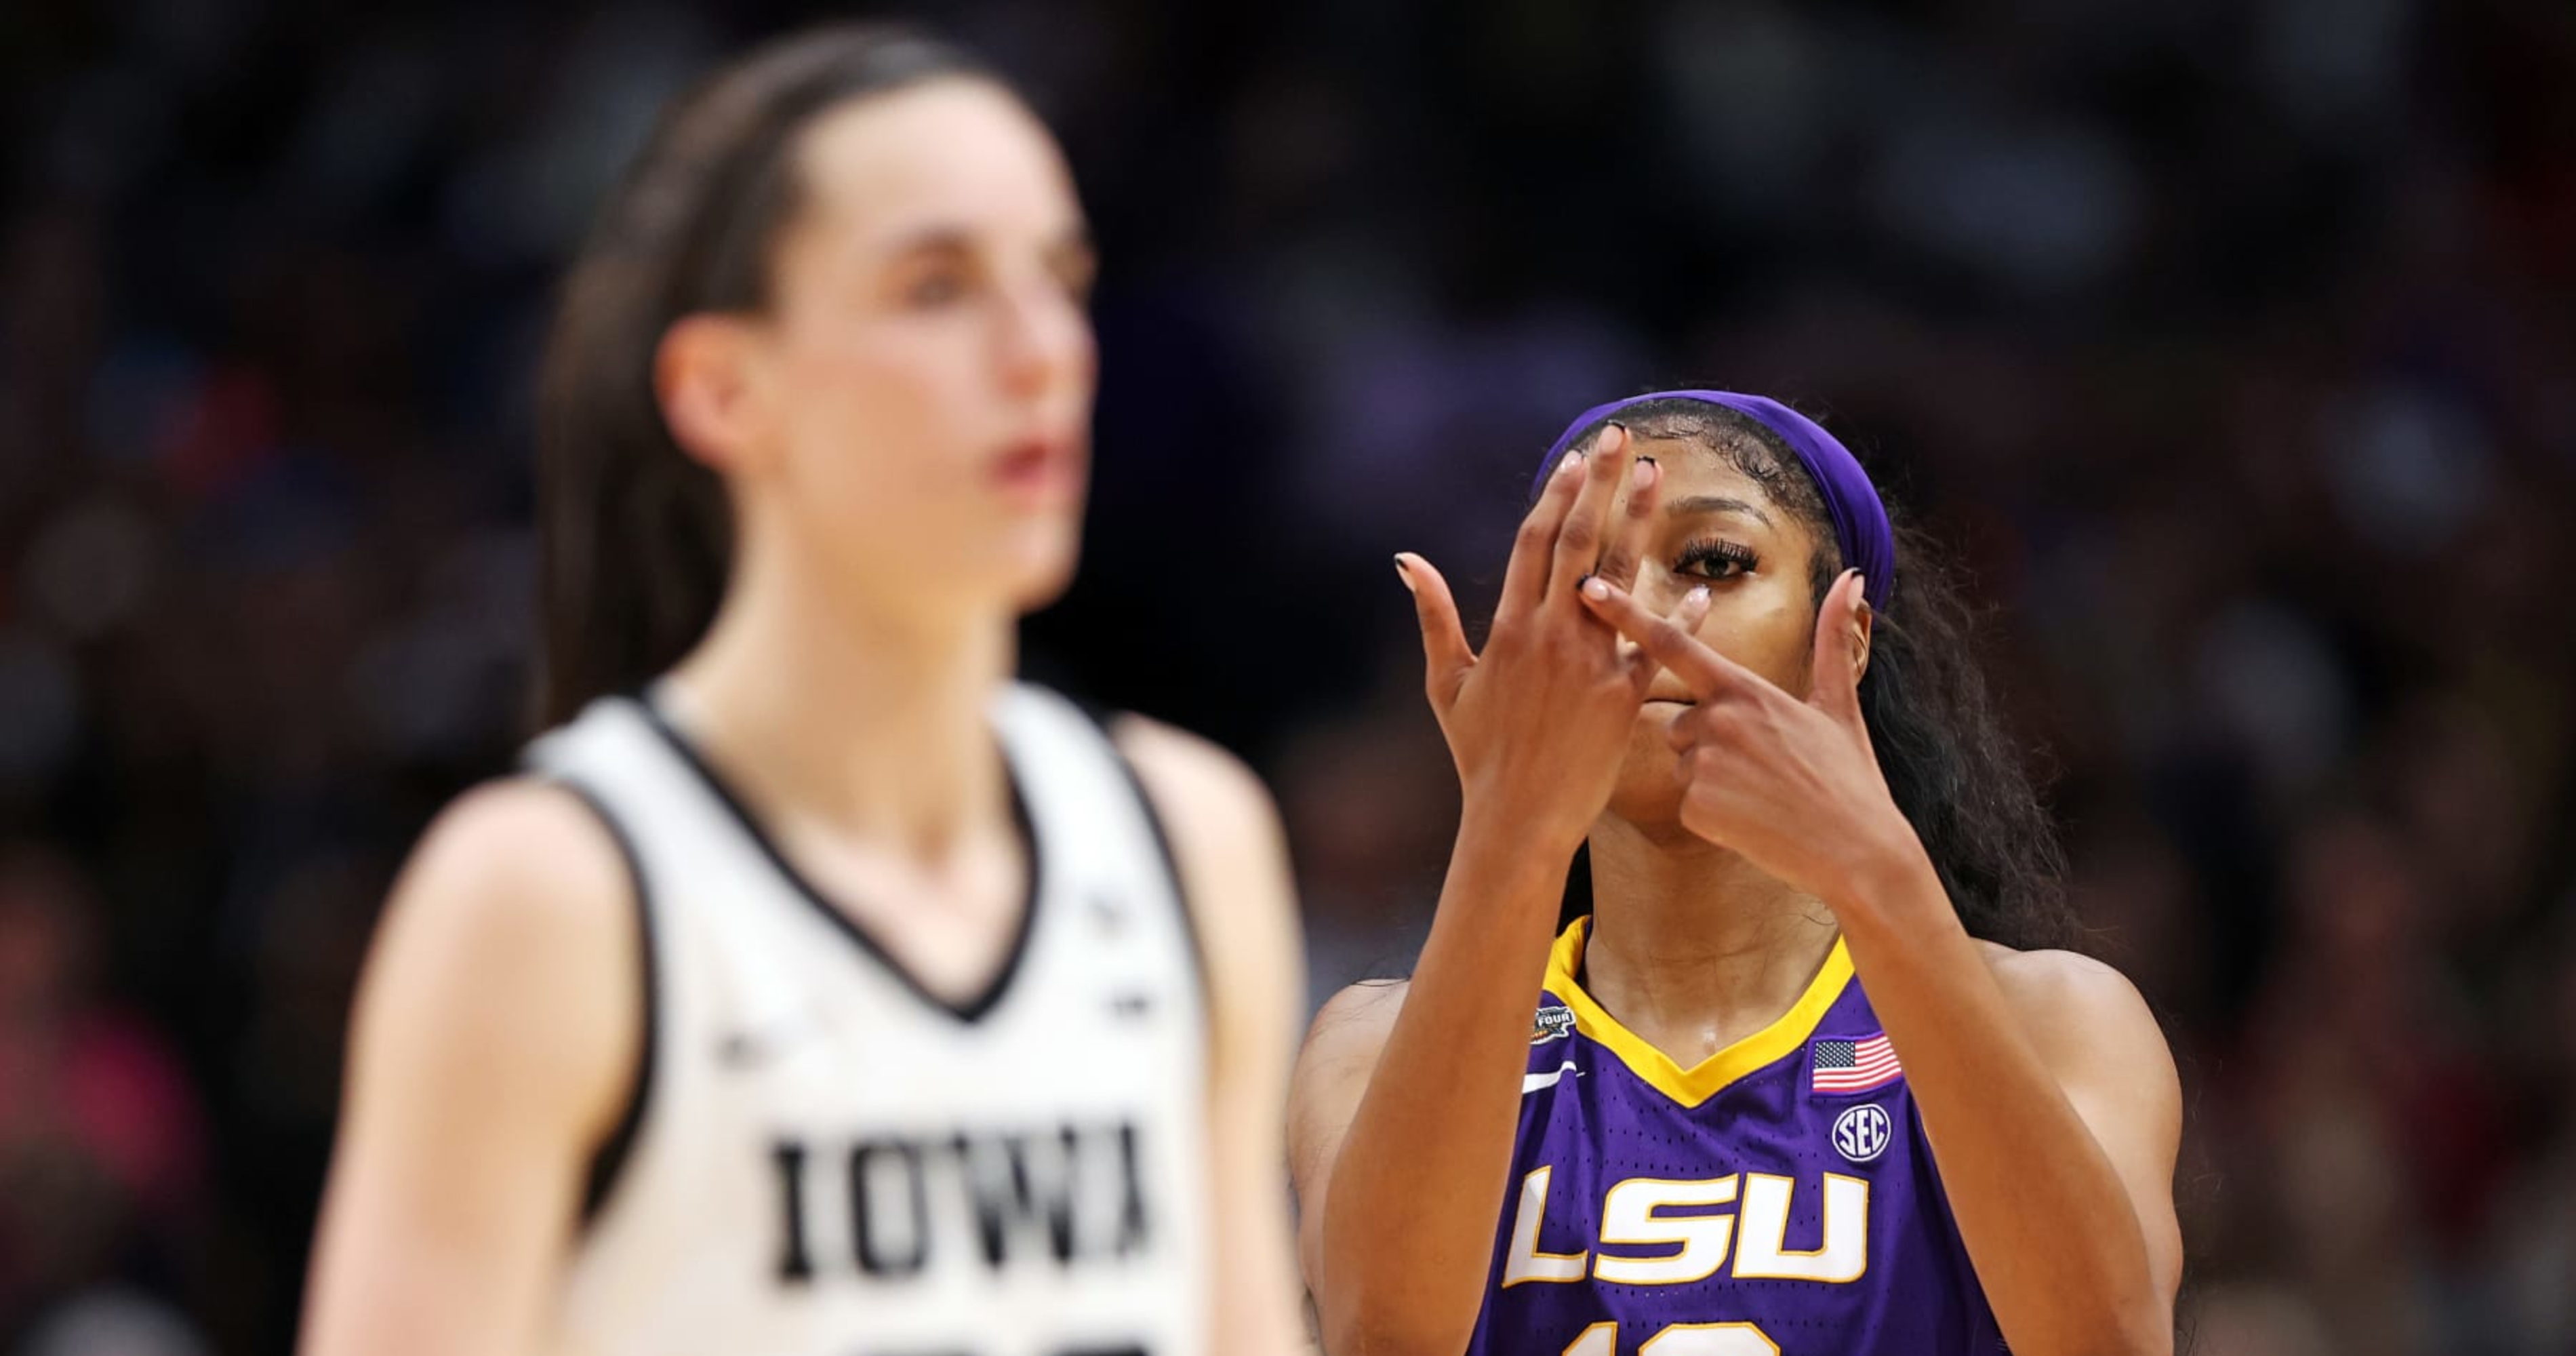 LSU's Angel Reese: 'I Love' Iowa's Caitlin Clark; 'People Can Think What They Think'